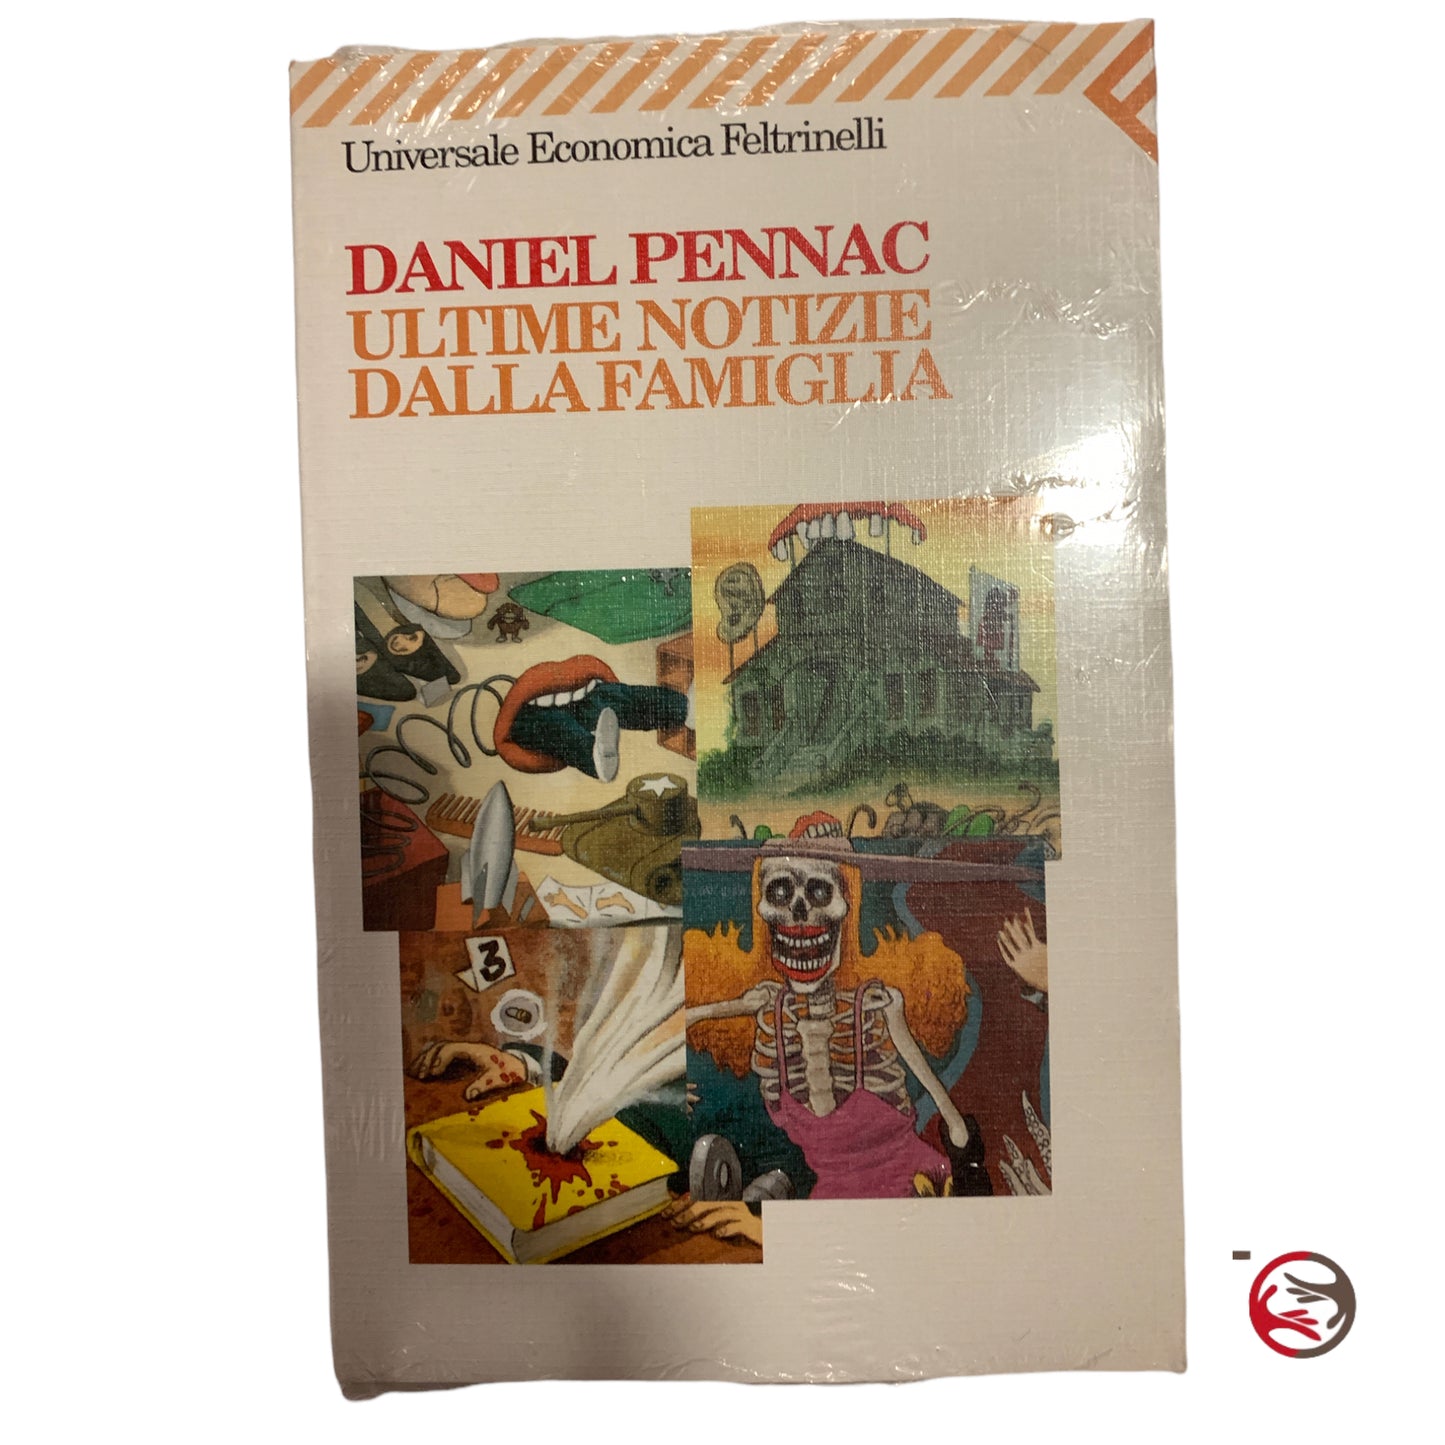 Daniel Pennac - Latest news from the family - new book